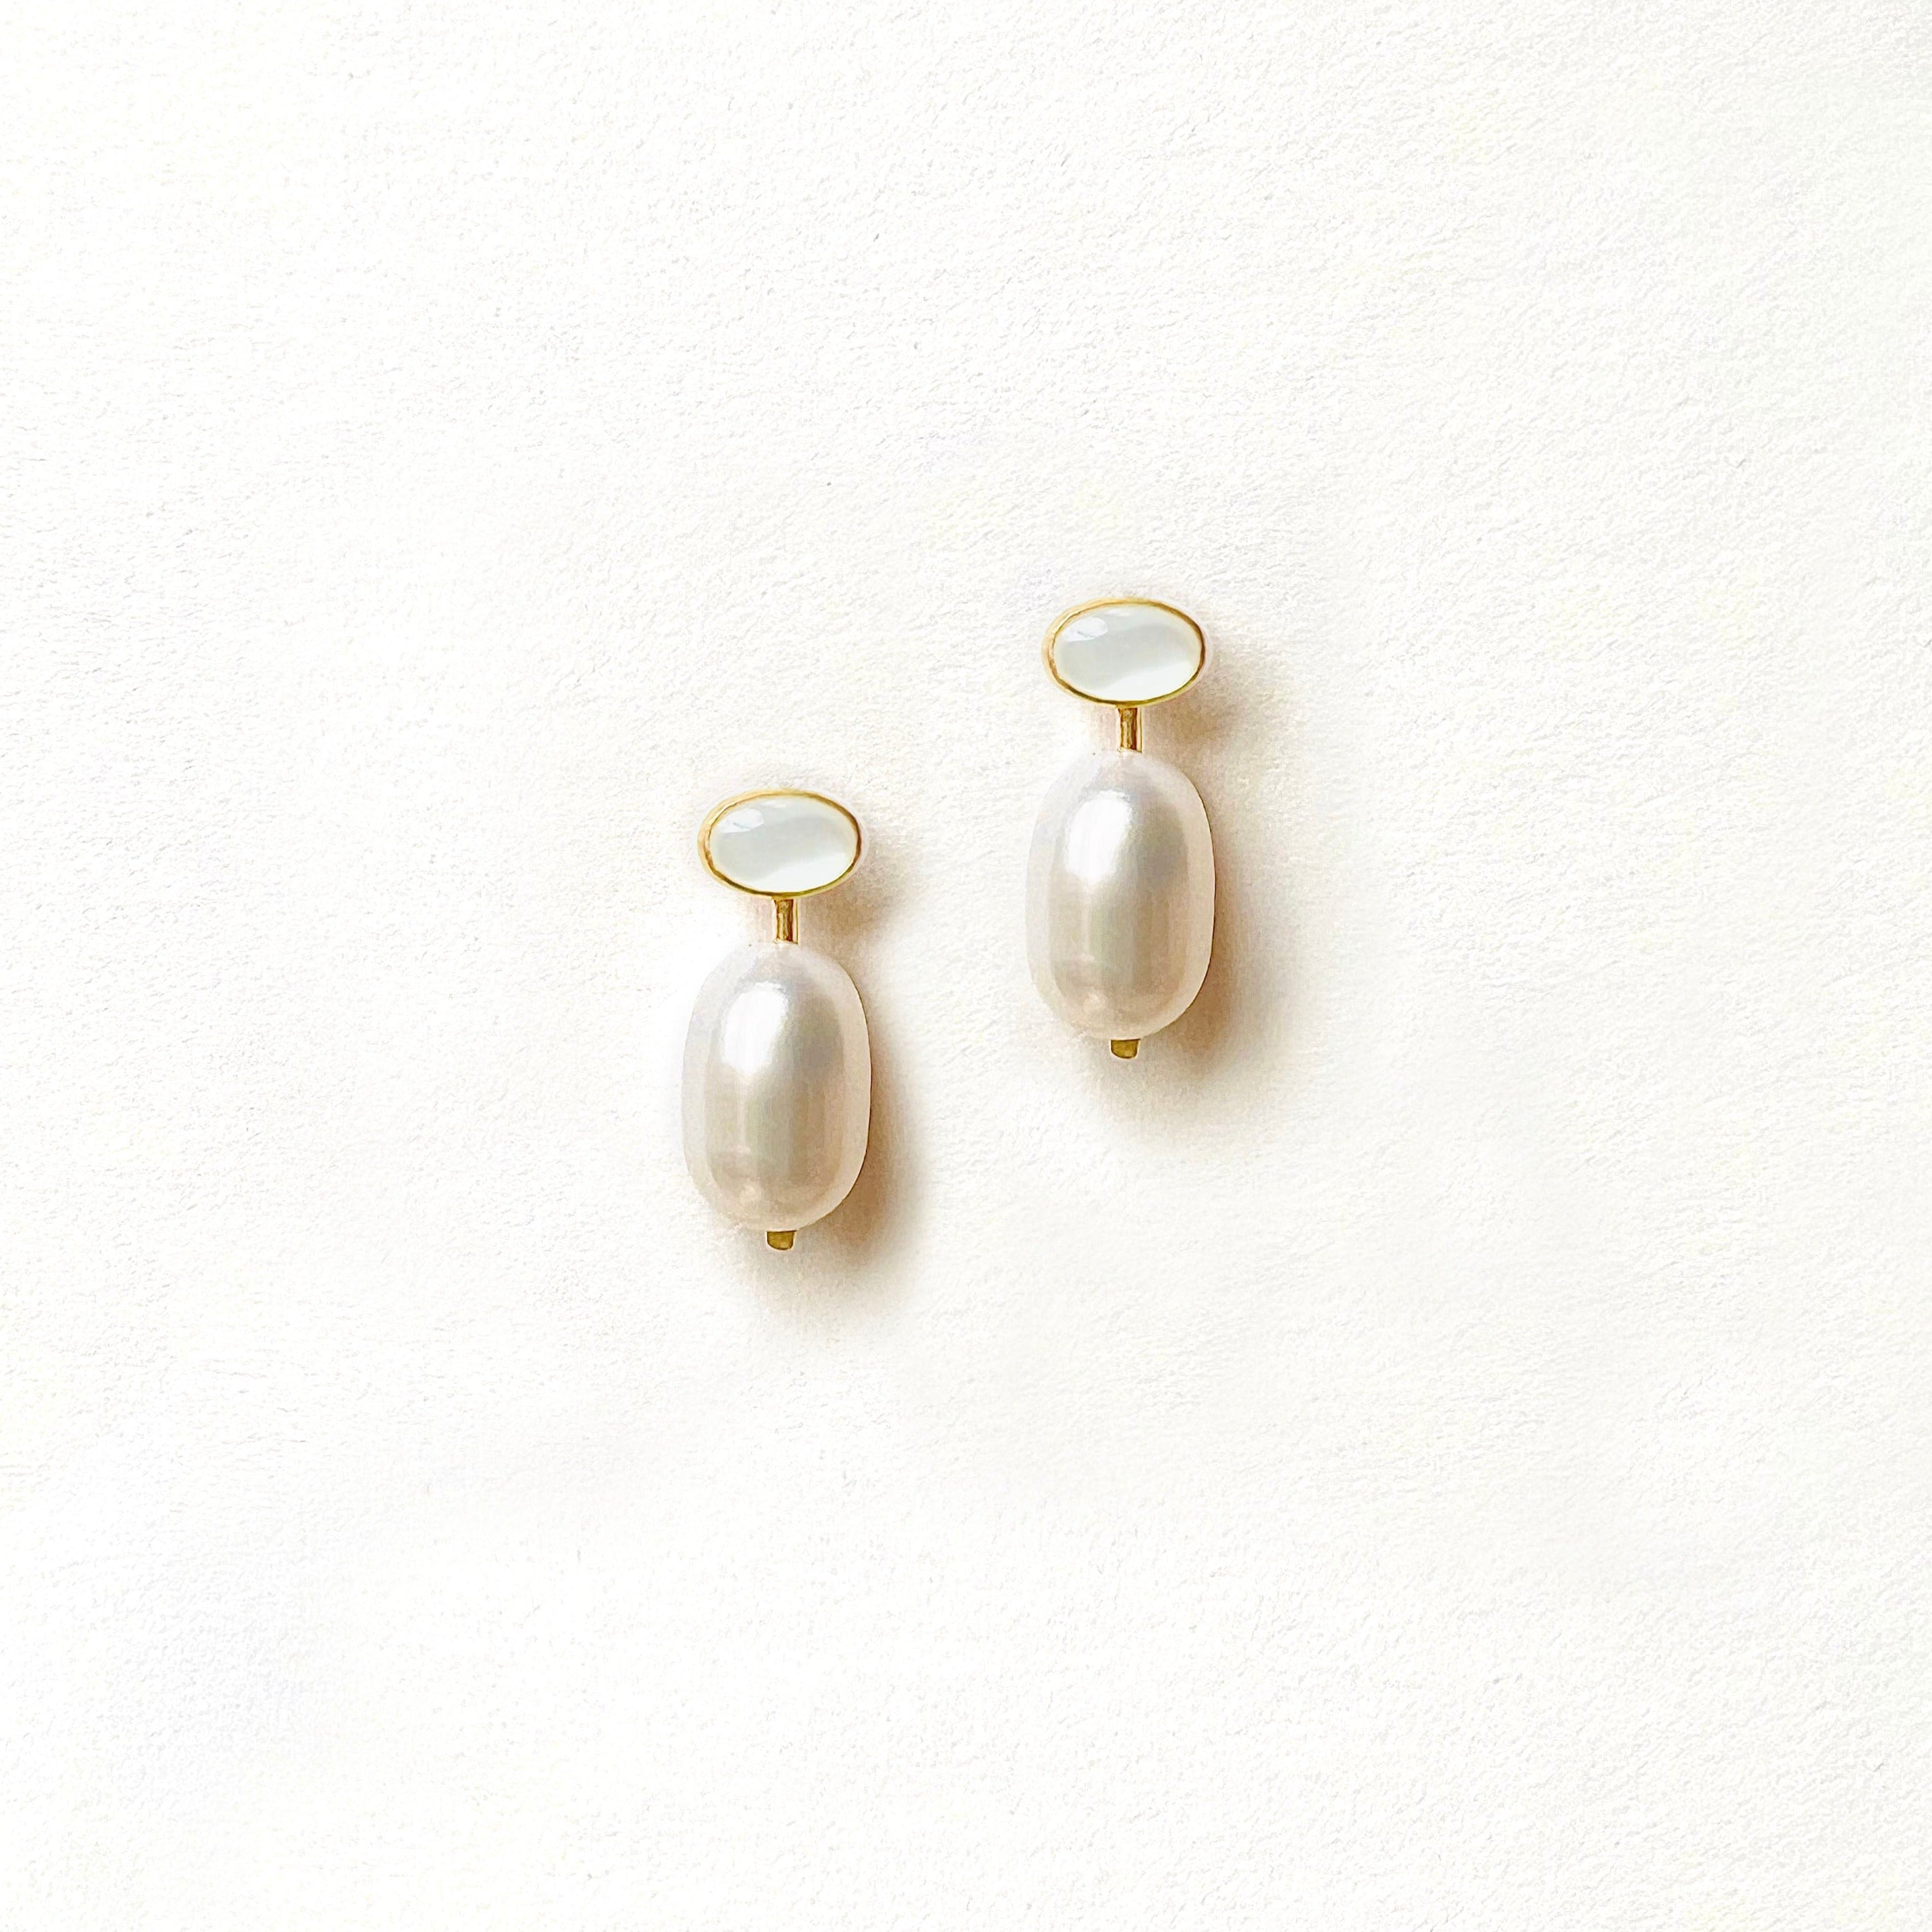 Double White Pearl Drop Earrings with an oval shape